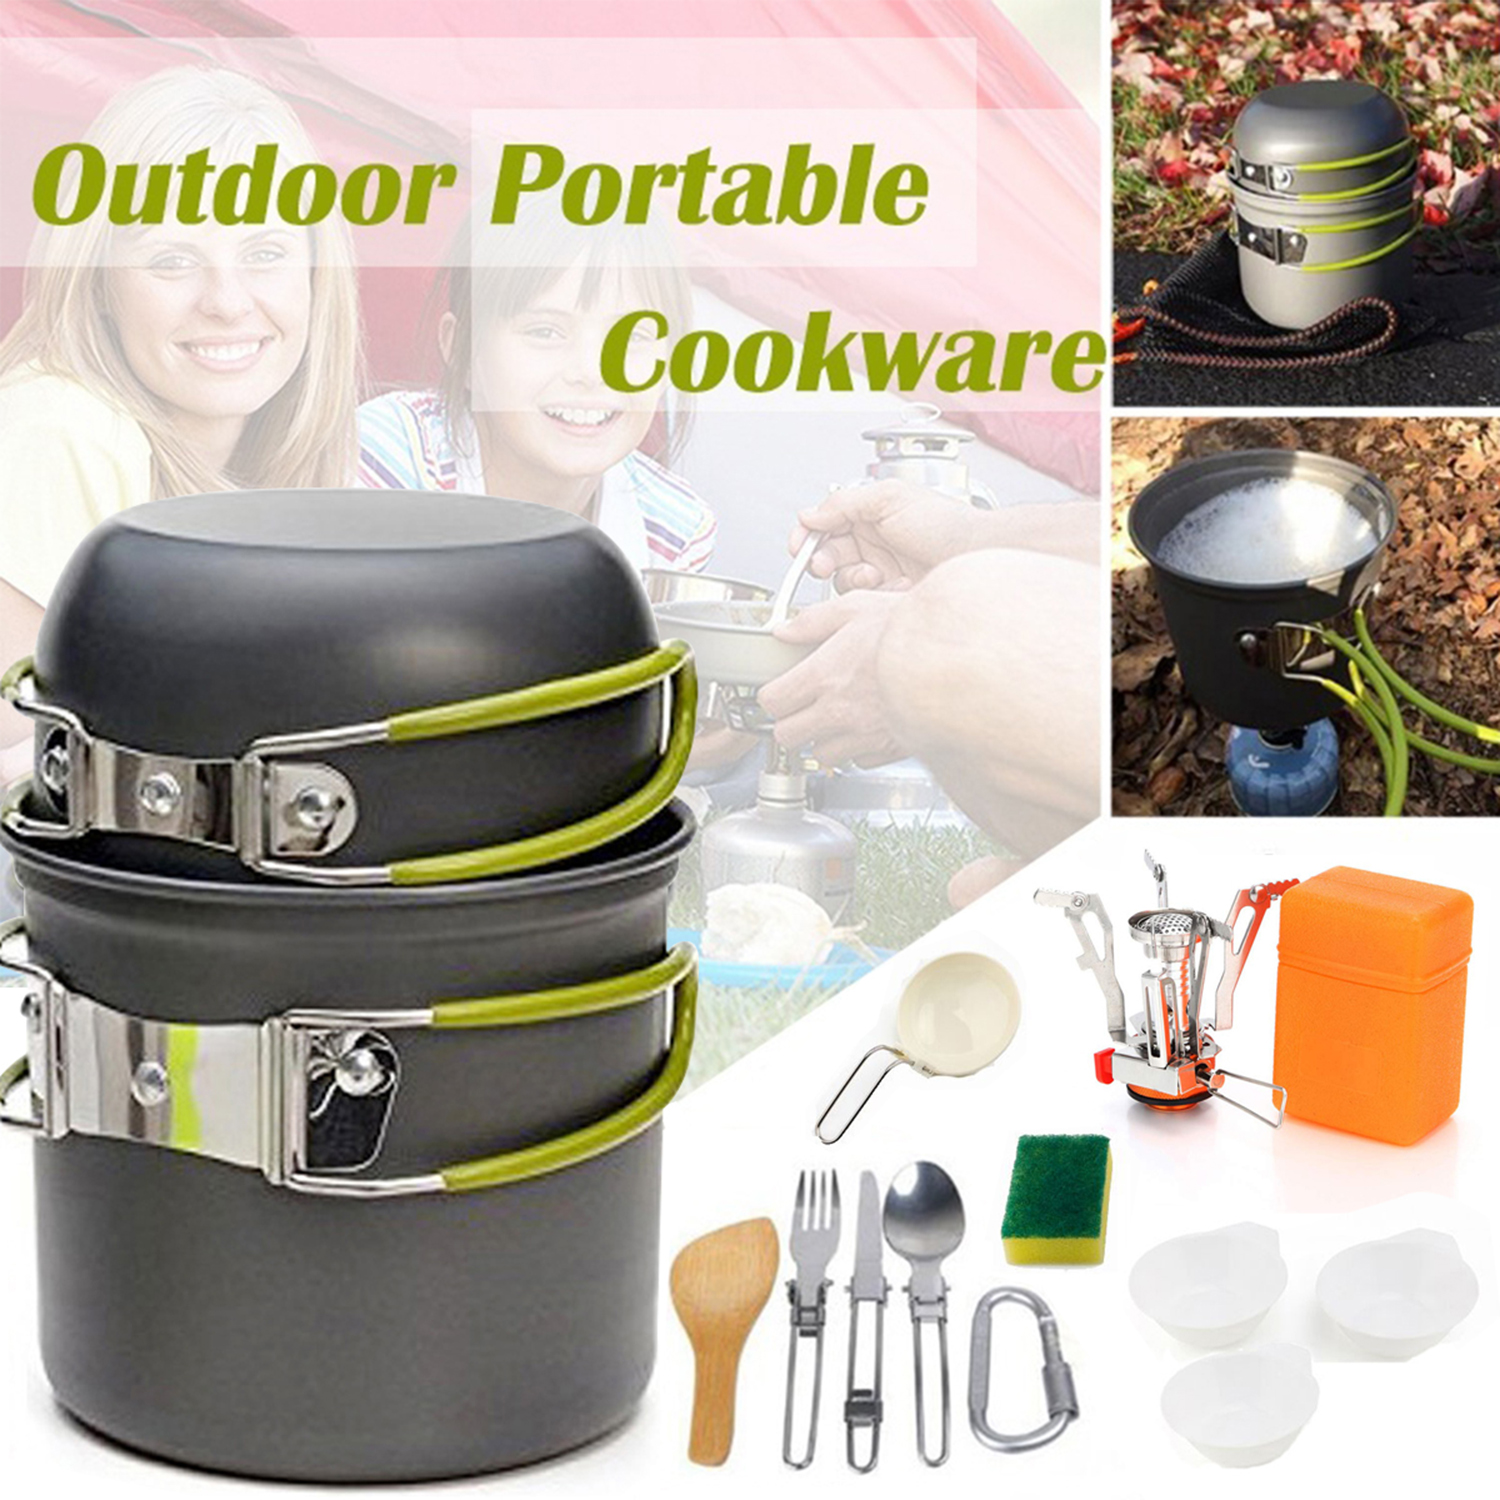 GL Portable Light Outdoor Camping Cookware Sets Gas Stove with Foldable Tableware Pan Dishwashing Sponge Hiking Picnic Tool 27